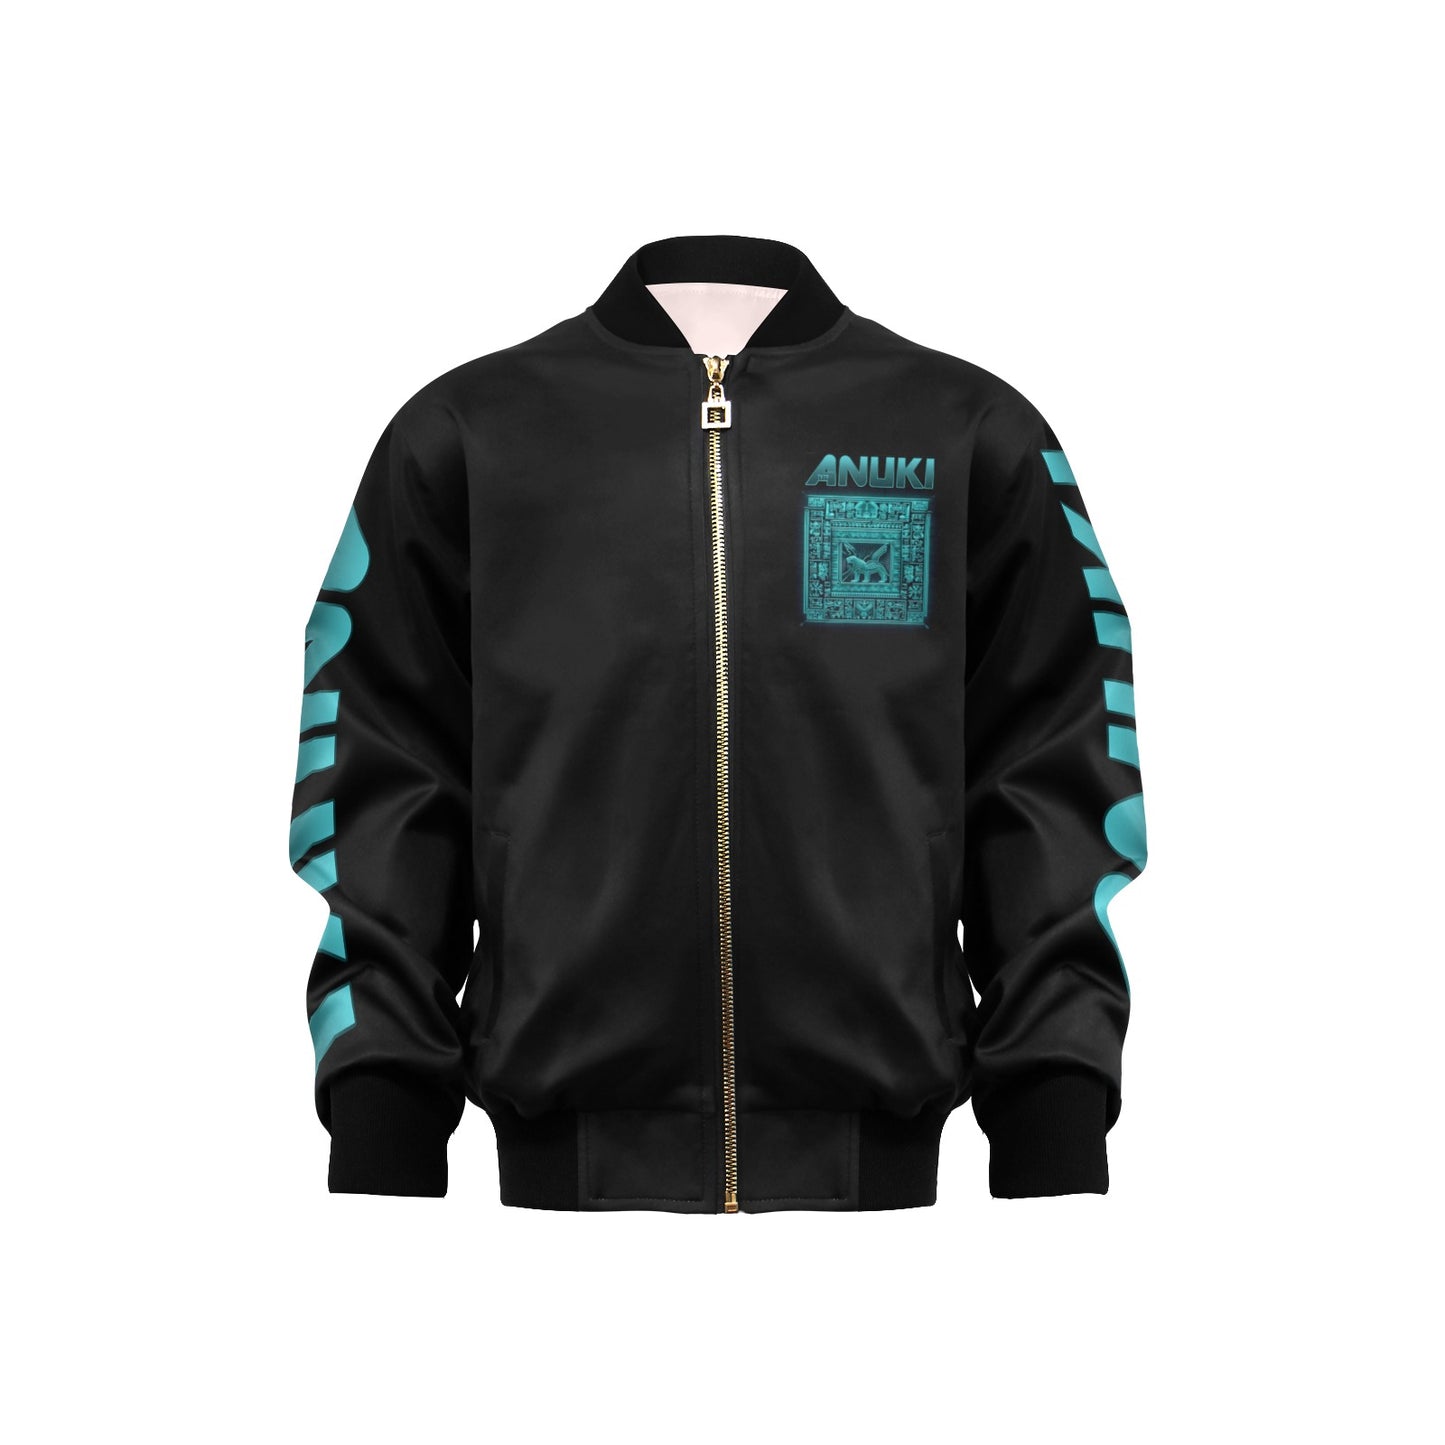 The Kids SabreNeon Bomber